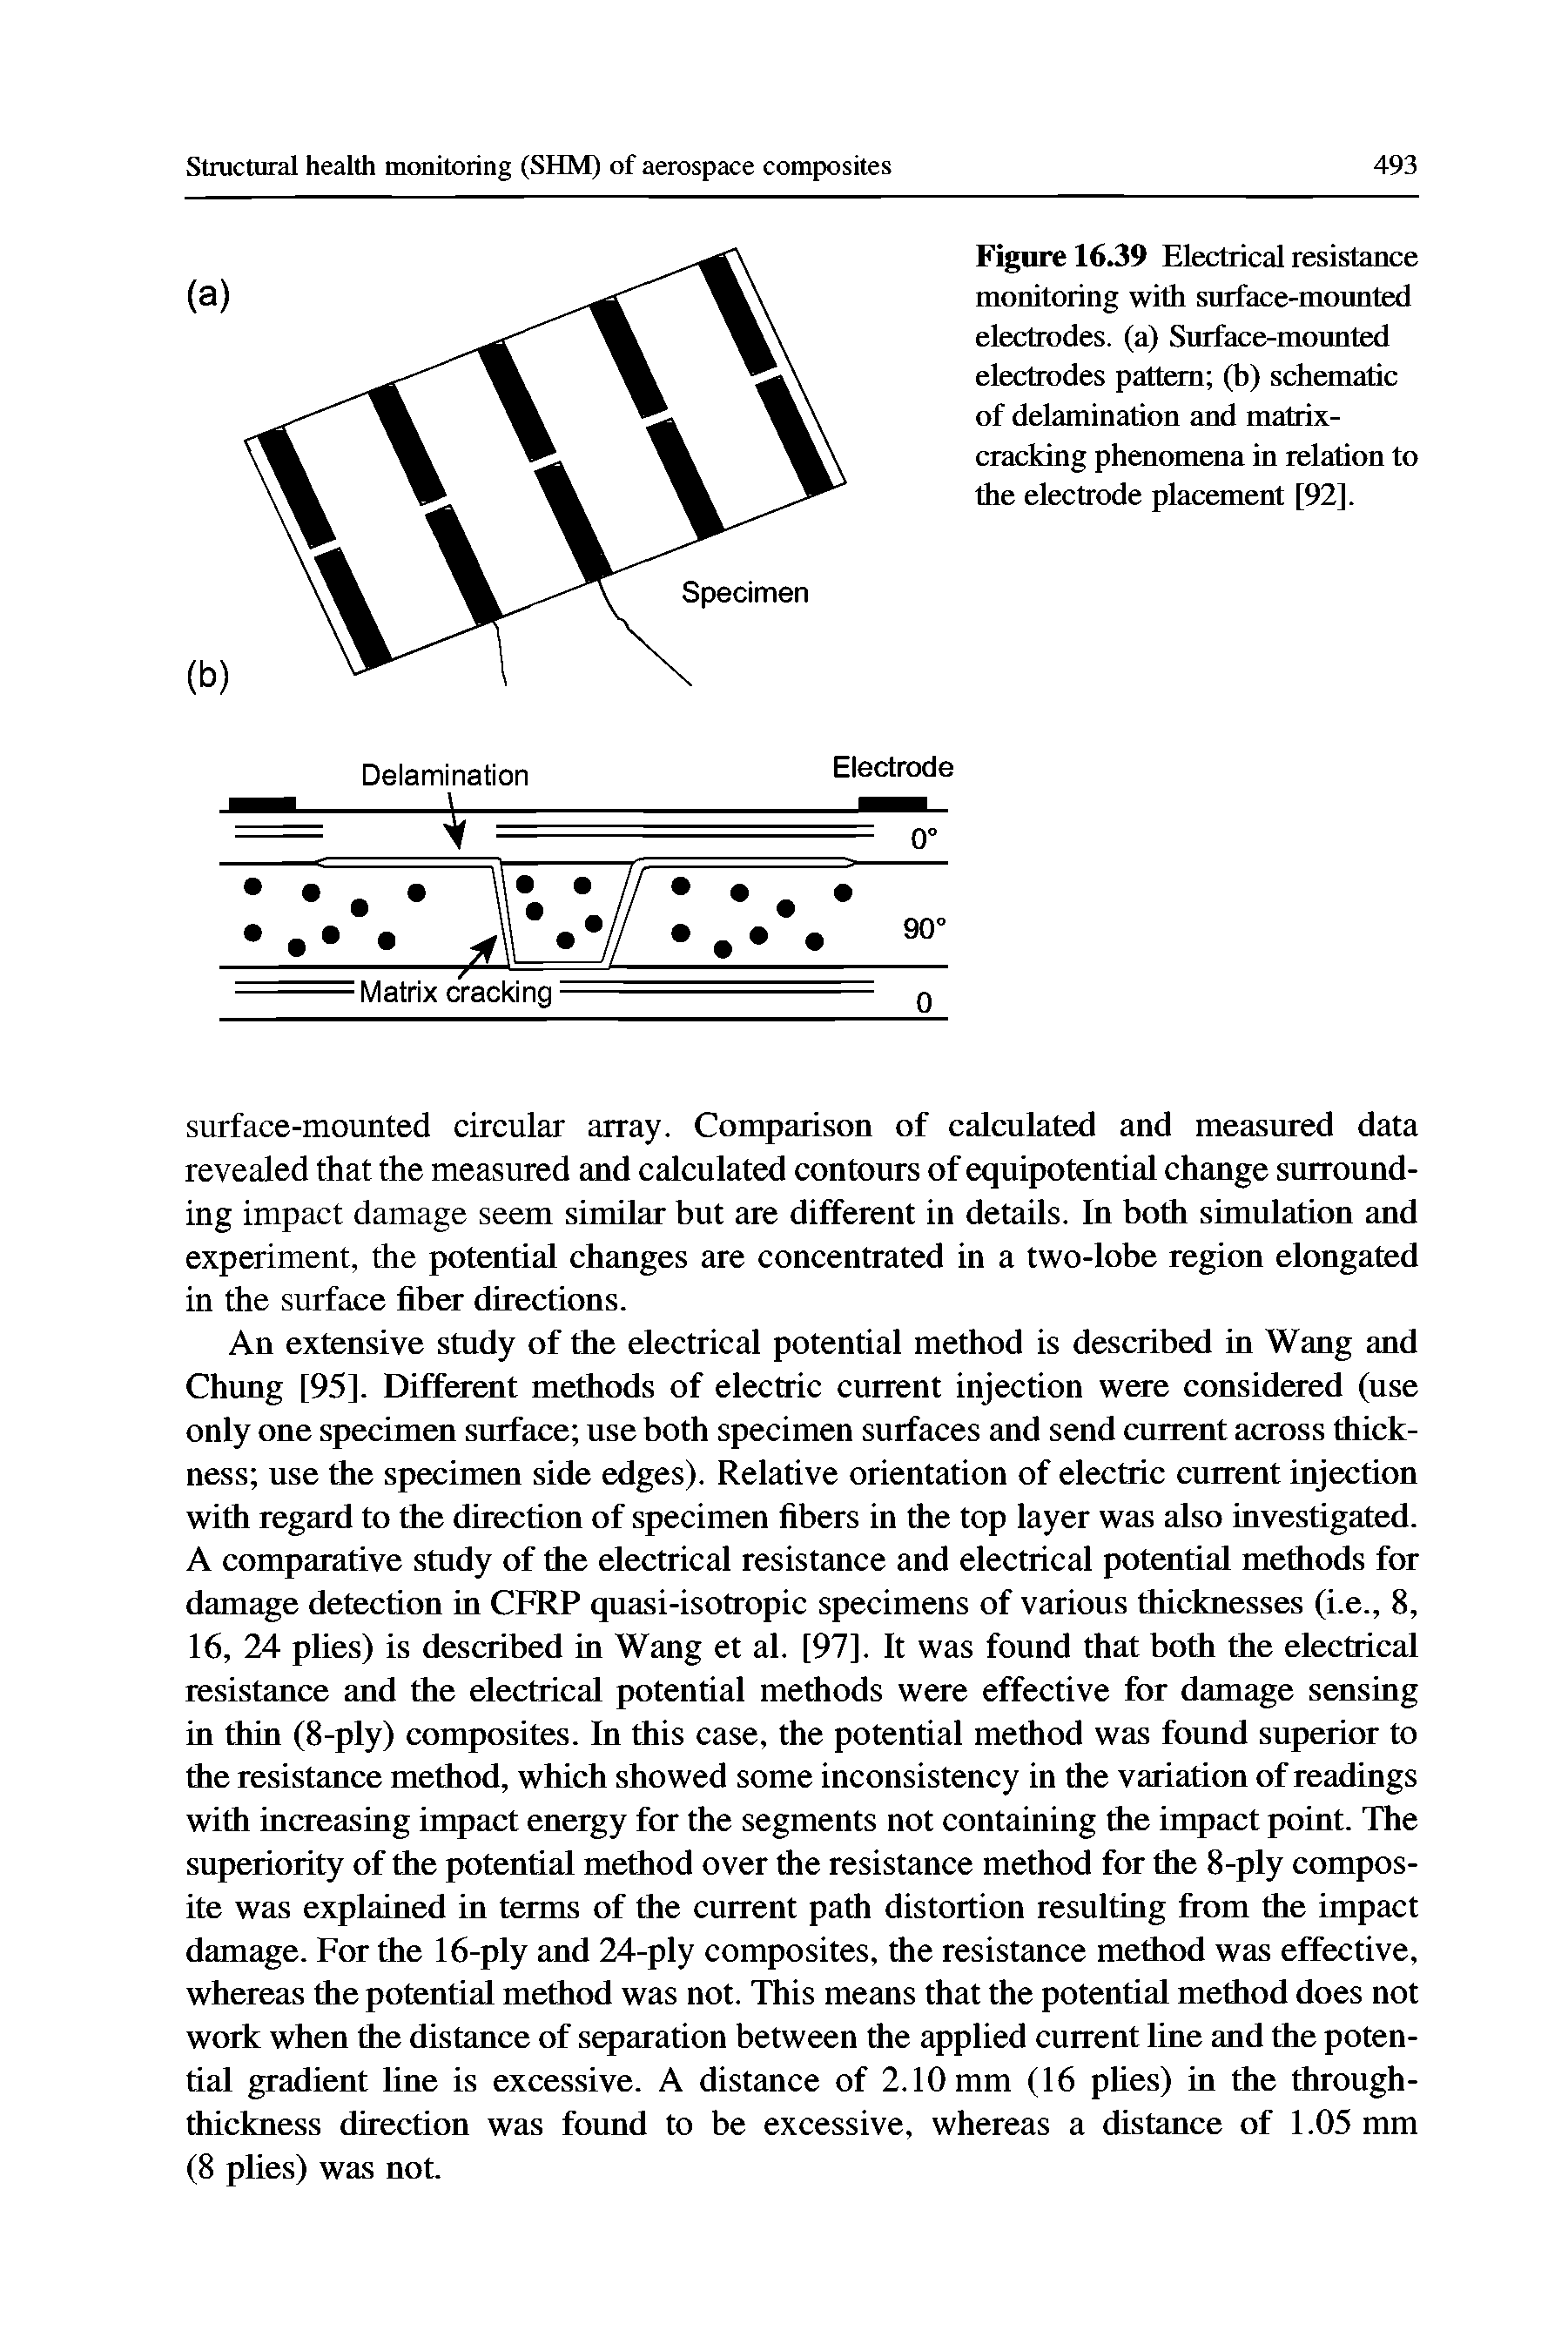 Figure 1639 Electrical resistance monitoring with surface-mounted electrodes, (a) Surface-mounted electrodes pattern (b) schematic of delamination and matrixcracking phenomena in relation to the electrode placement [92].